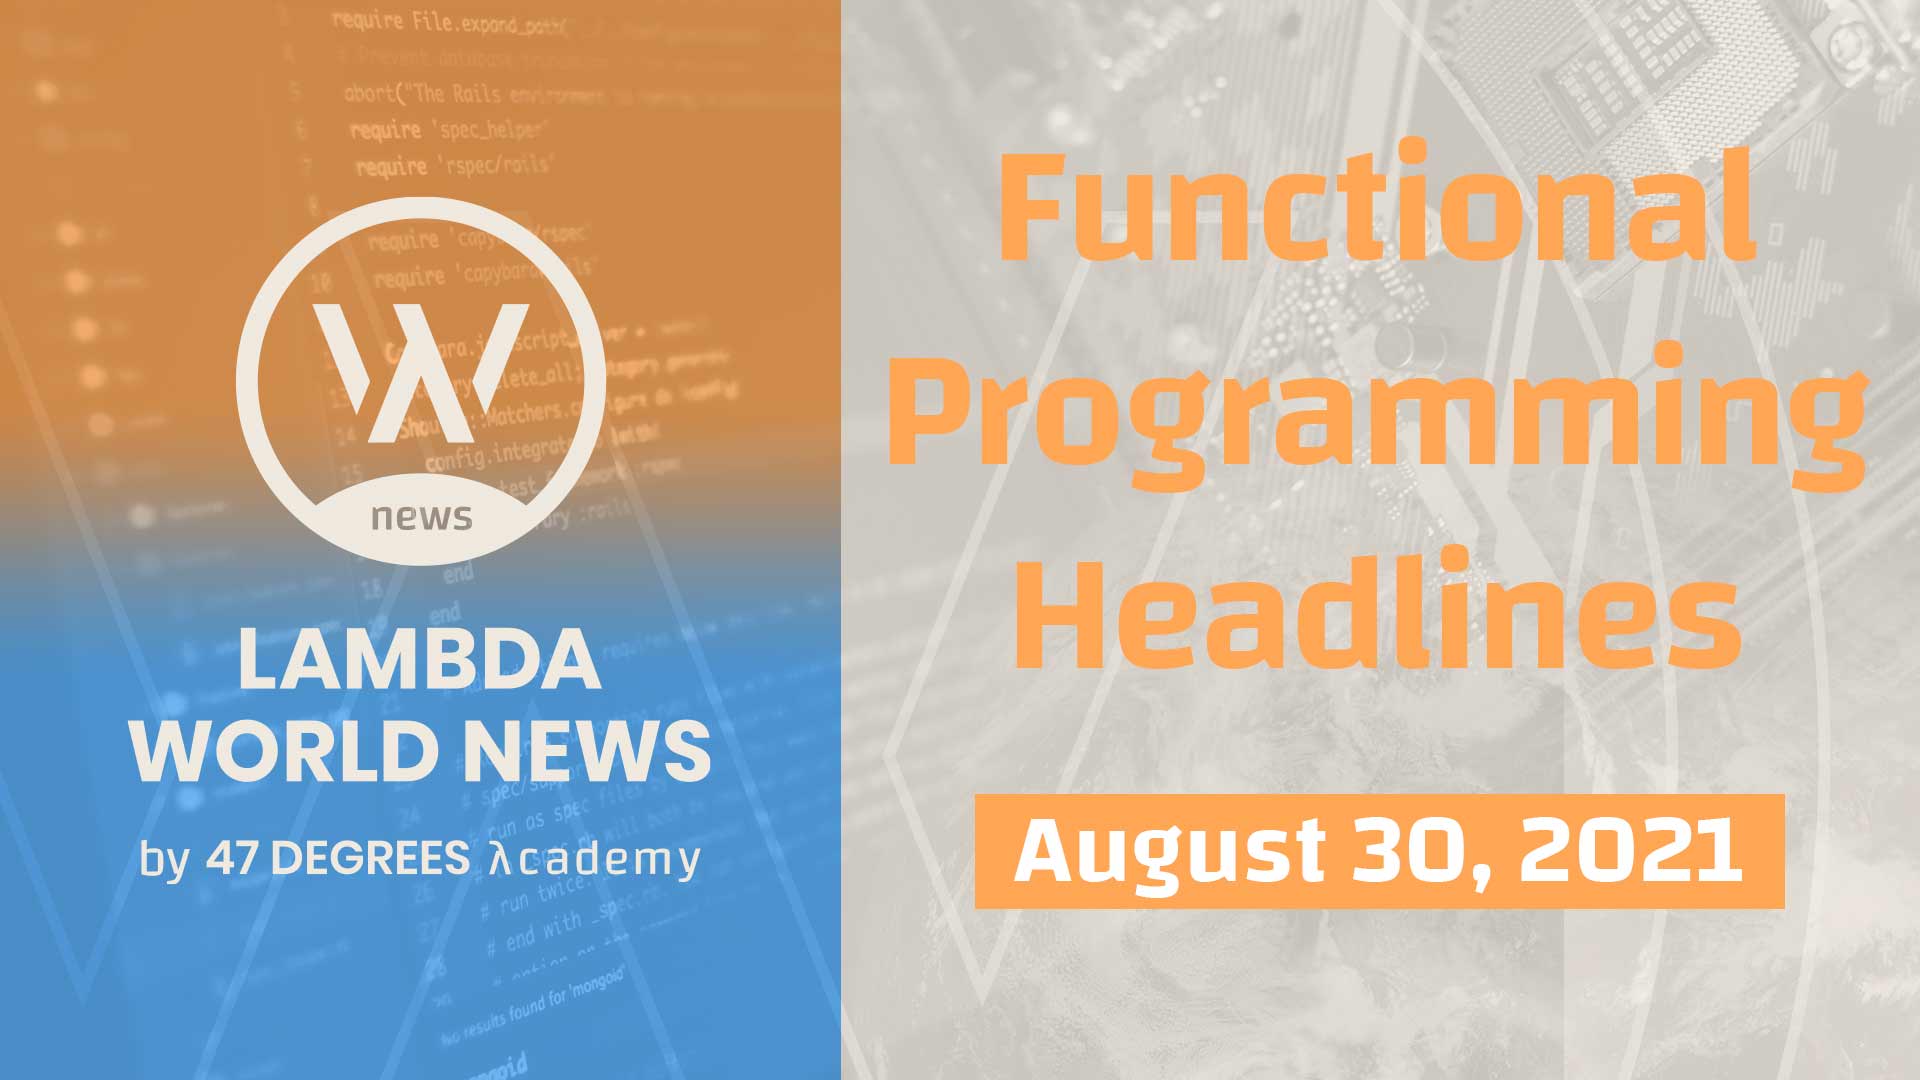 Lambda World News | Functional Programming Headlines for the week of August 30th, 2021